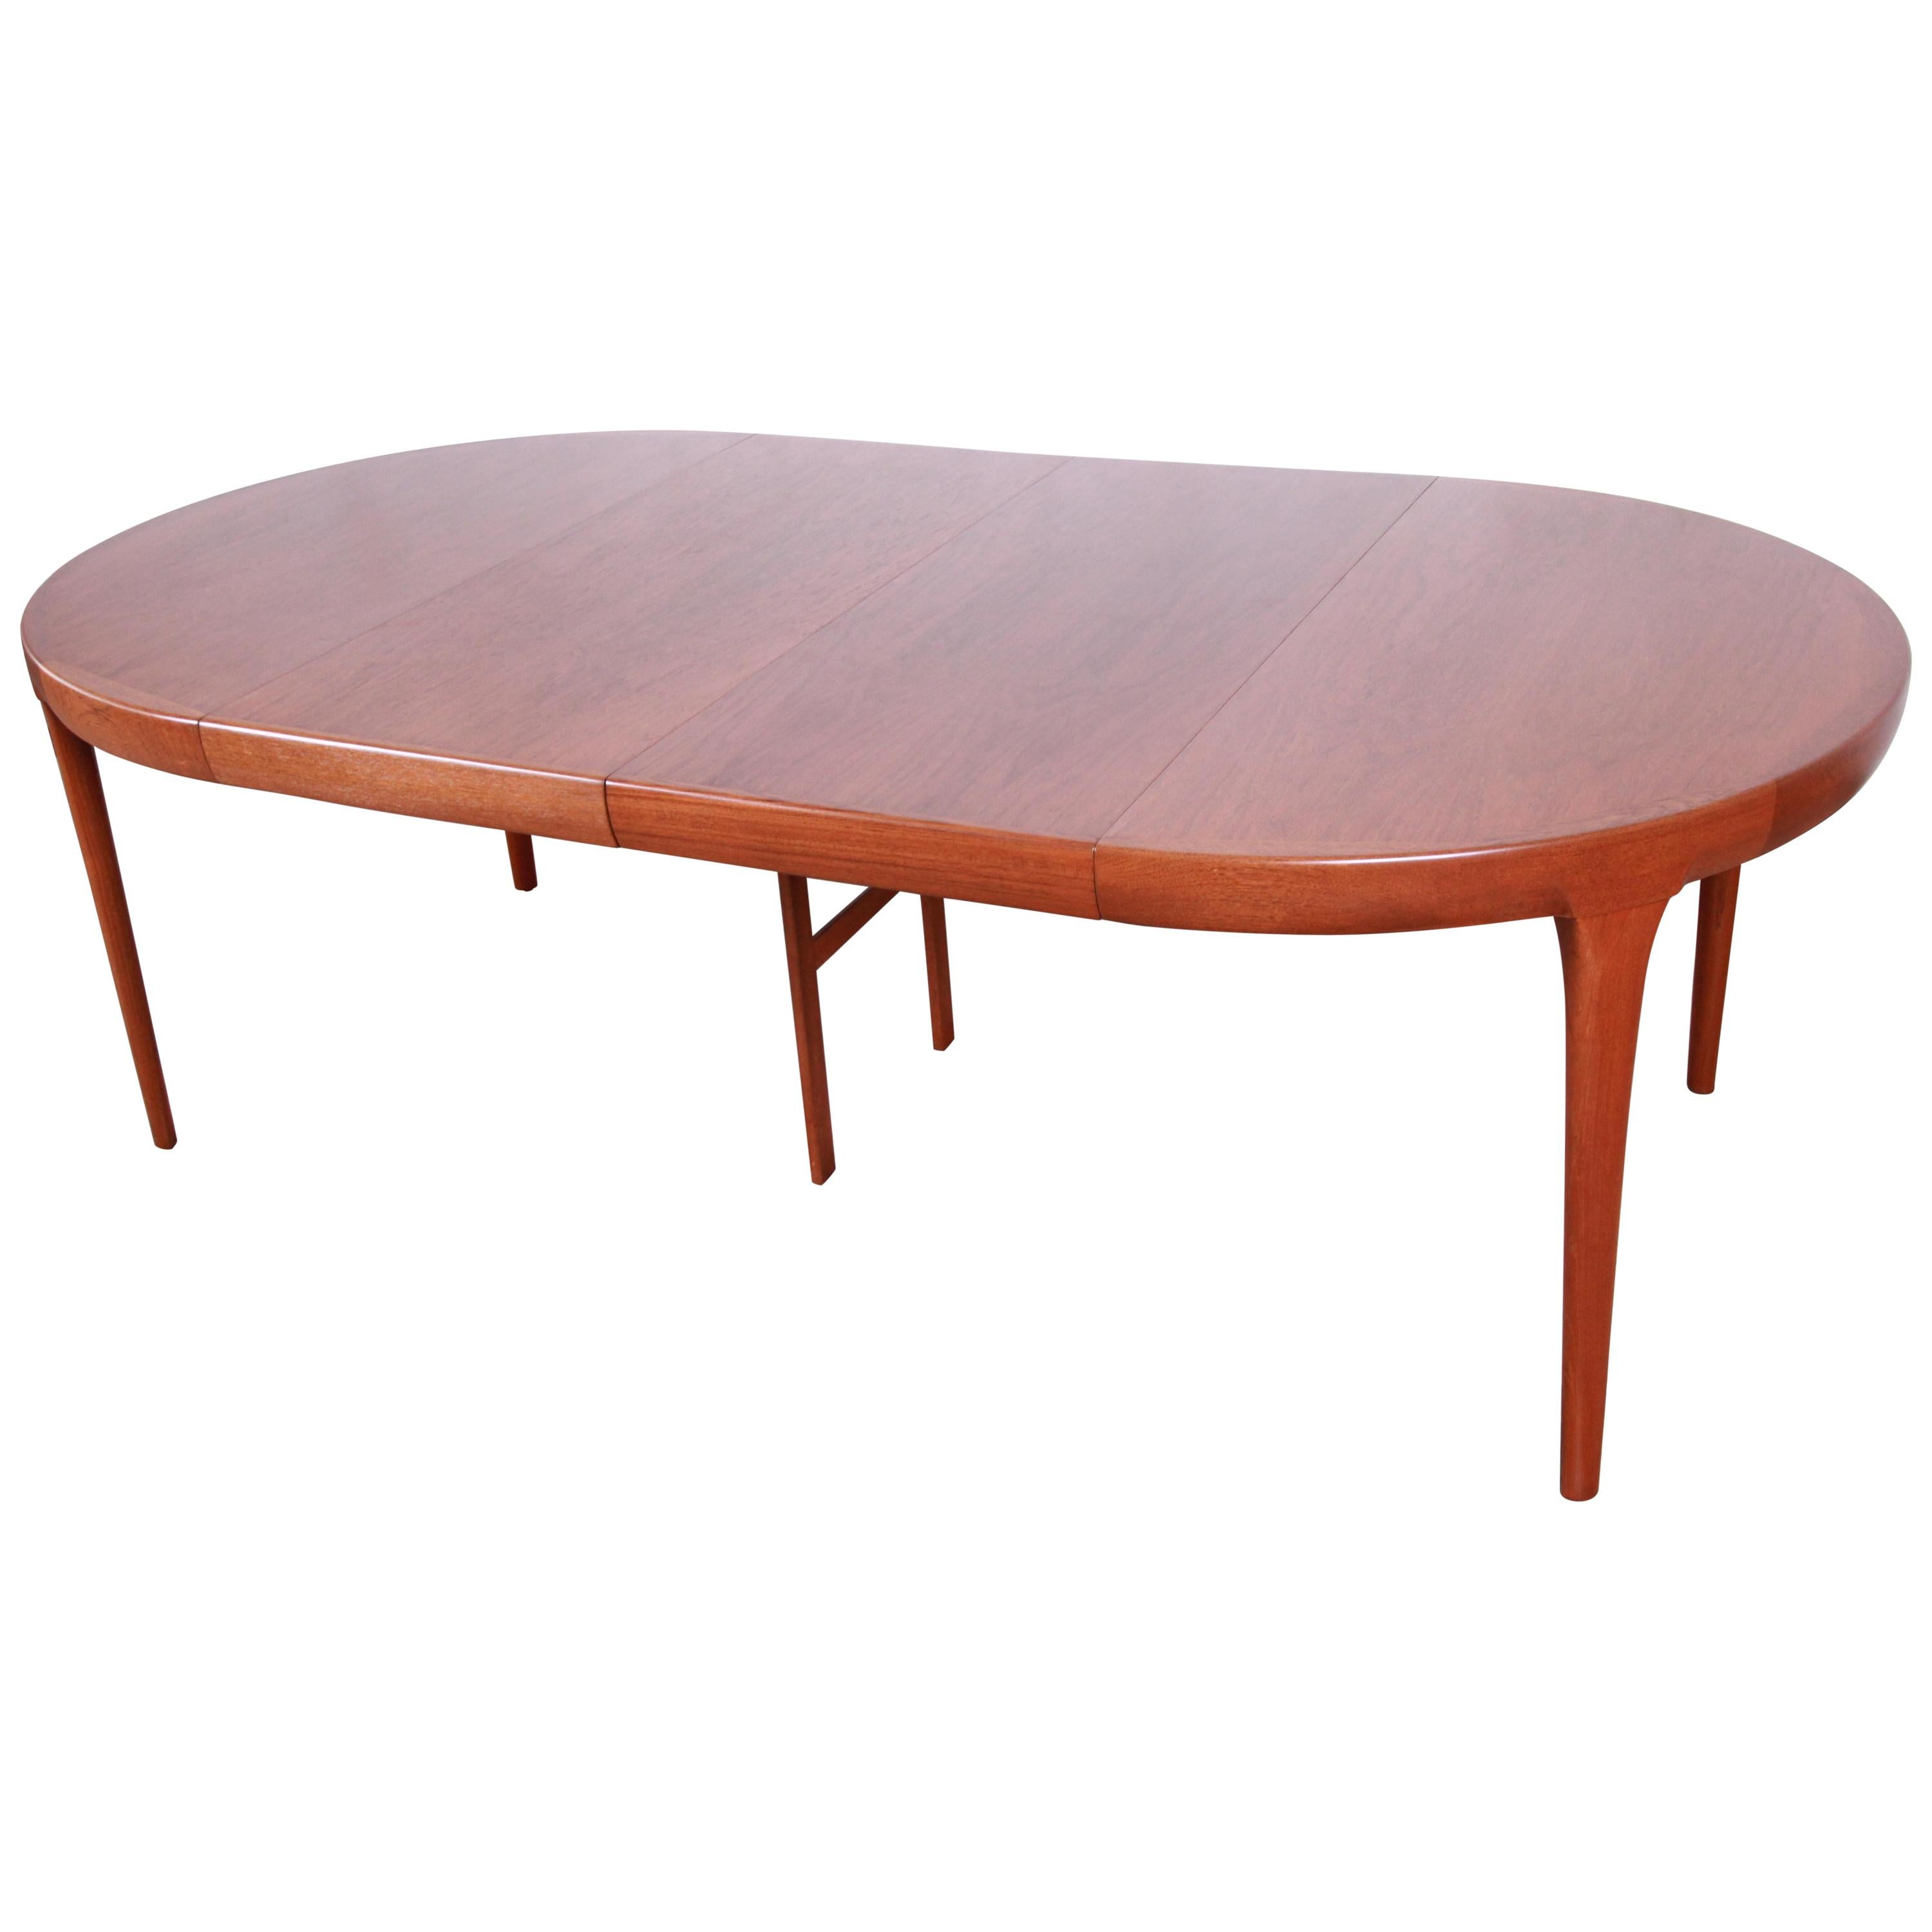 Ib Kofod-Larsen for Faarup Danish Teak Extension Dining Table, Newly Restored